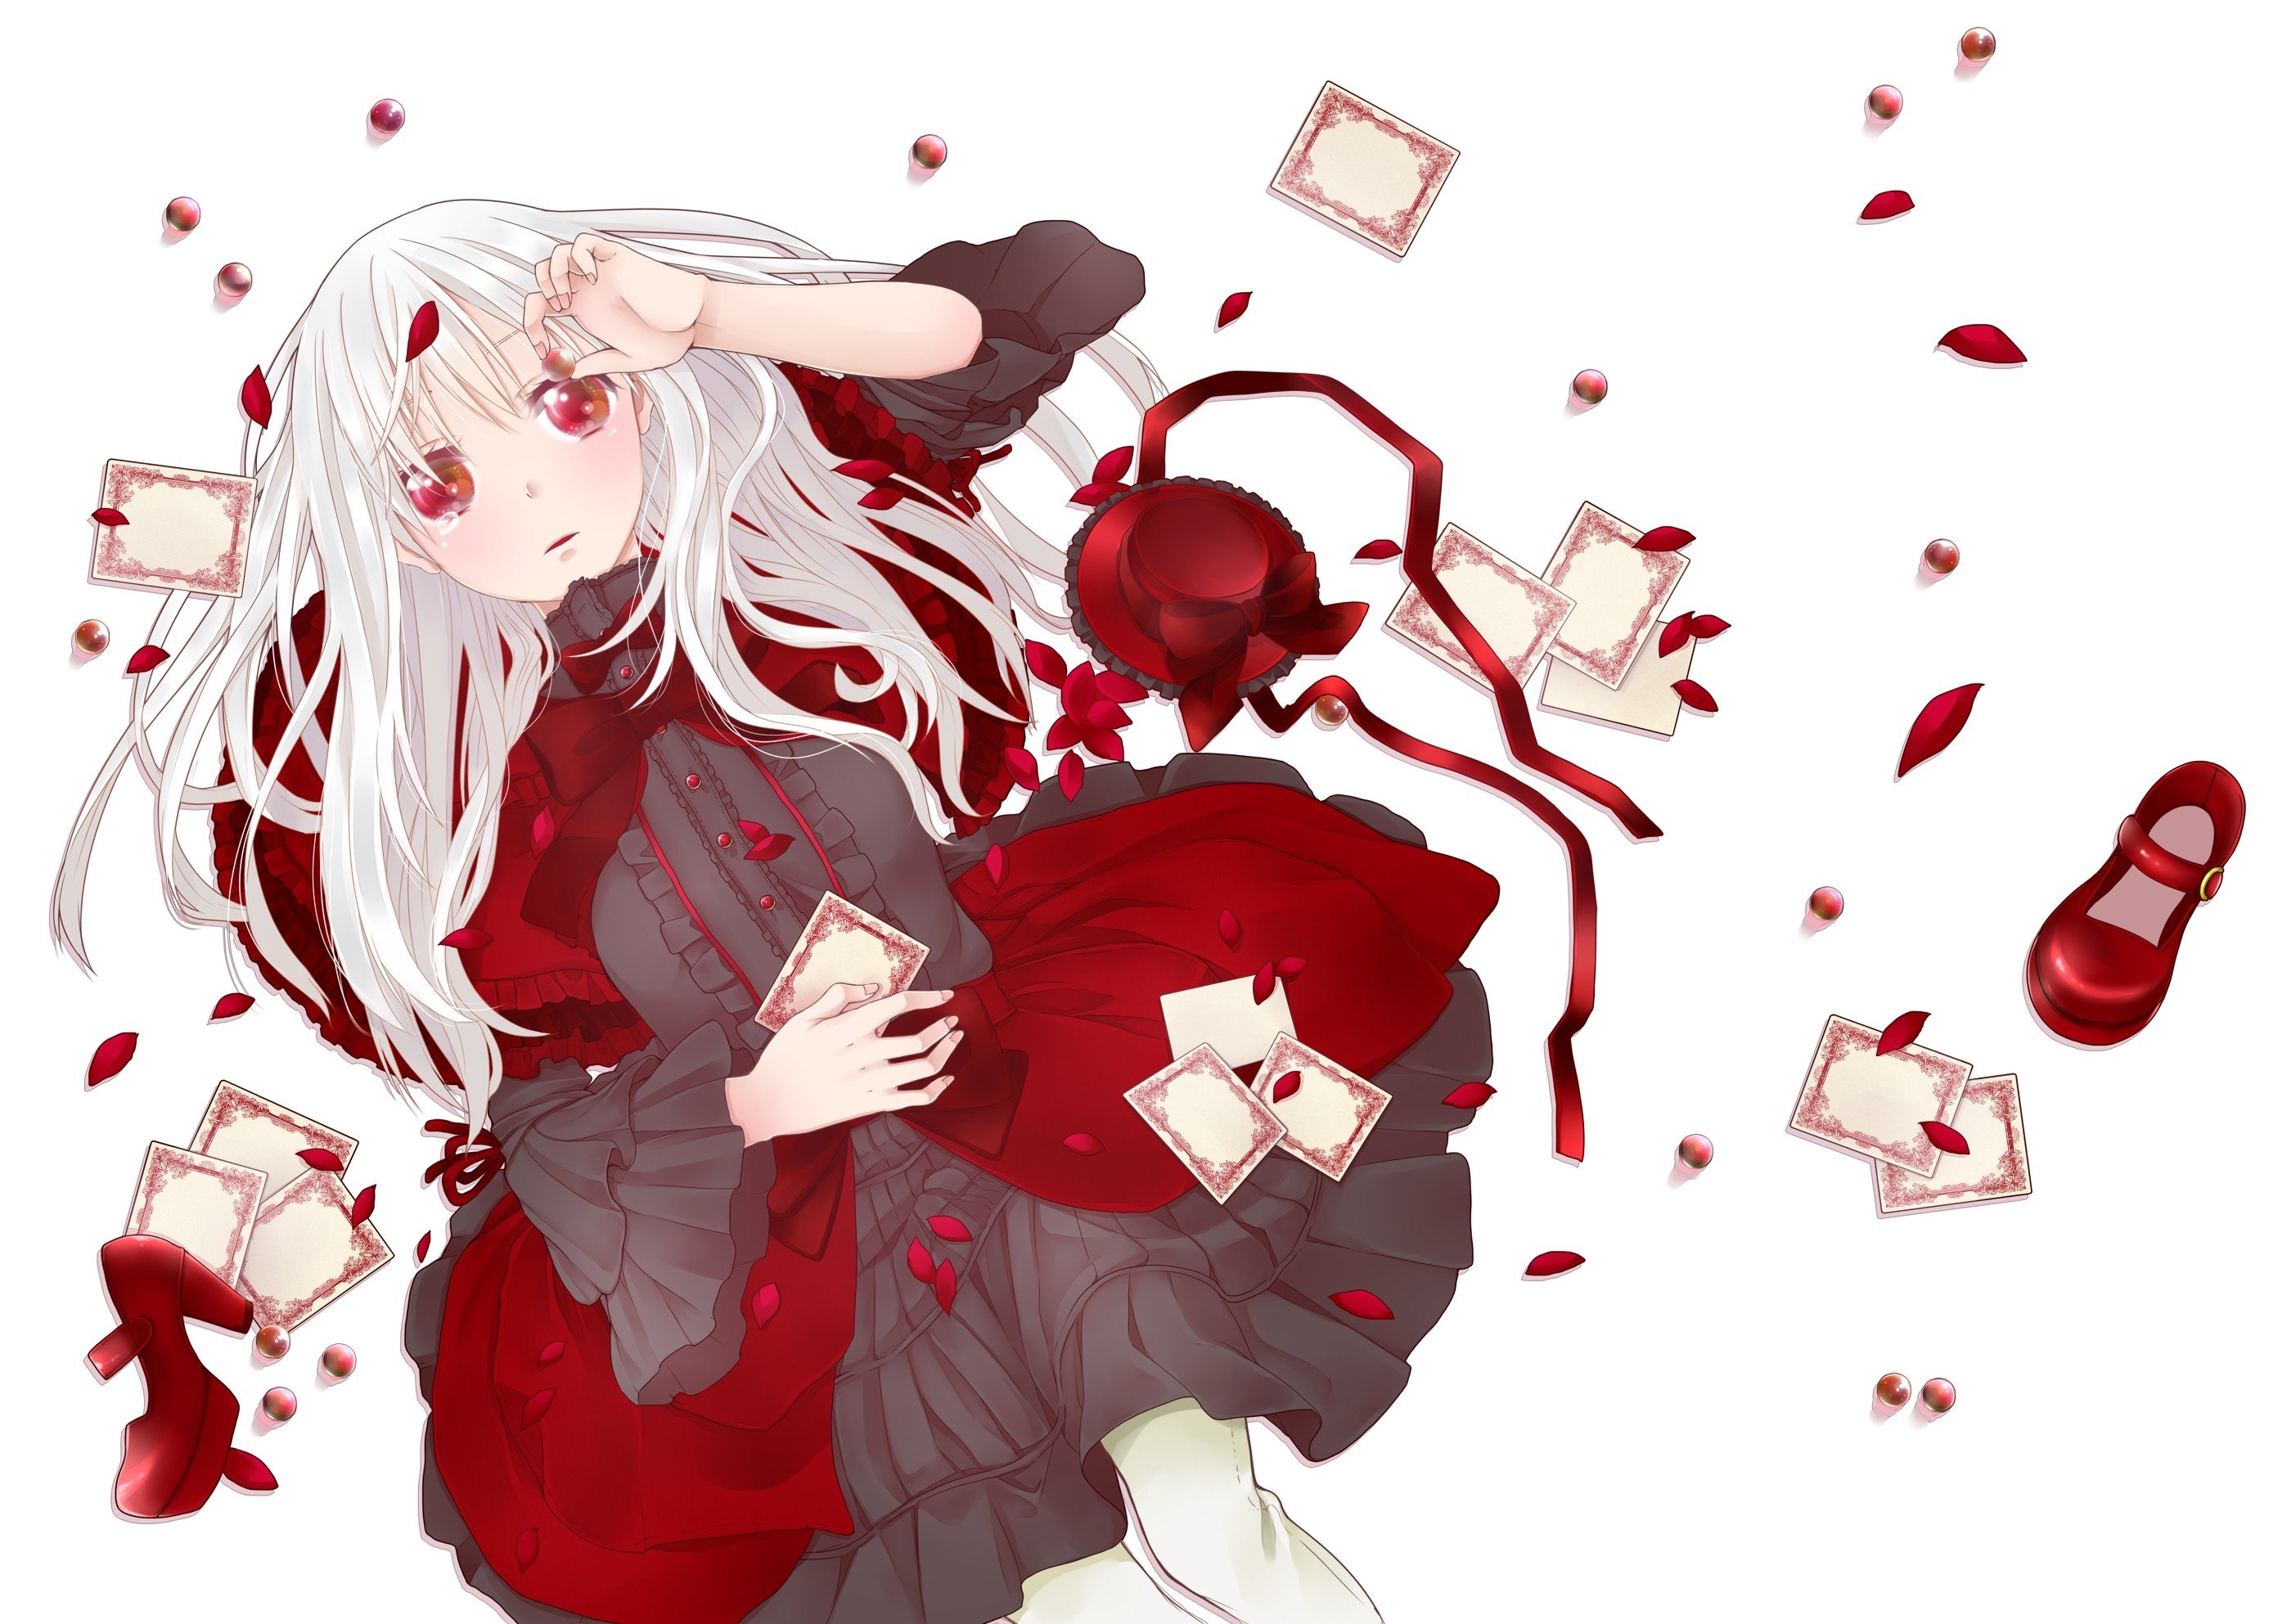 Cards Dress Tears Long Hair Balls Shoes Red Eyes Lying Down Anime Crying White Hair Lolita Fashion Flower Petals Hats Anime Girls K Project Kushina Anna Wallpapers Hd Desktop And Mobile